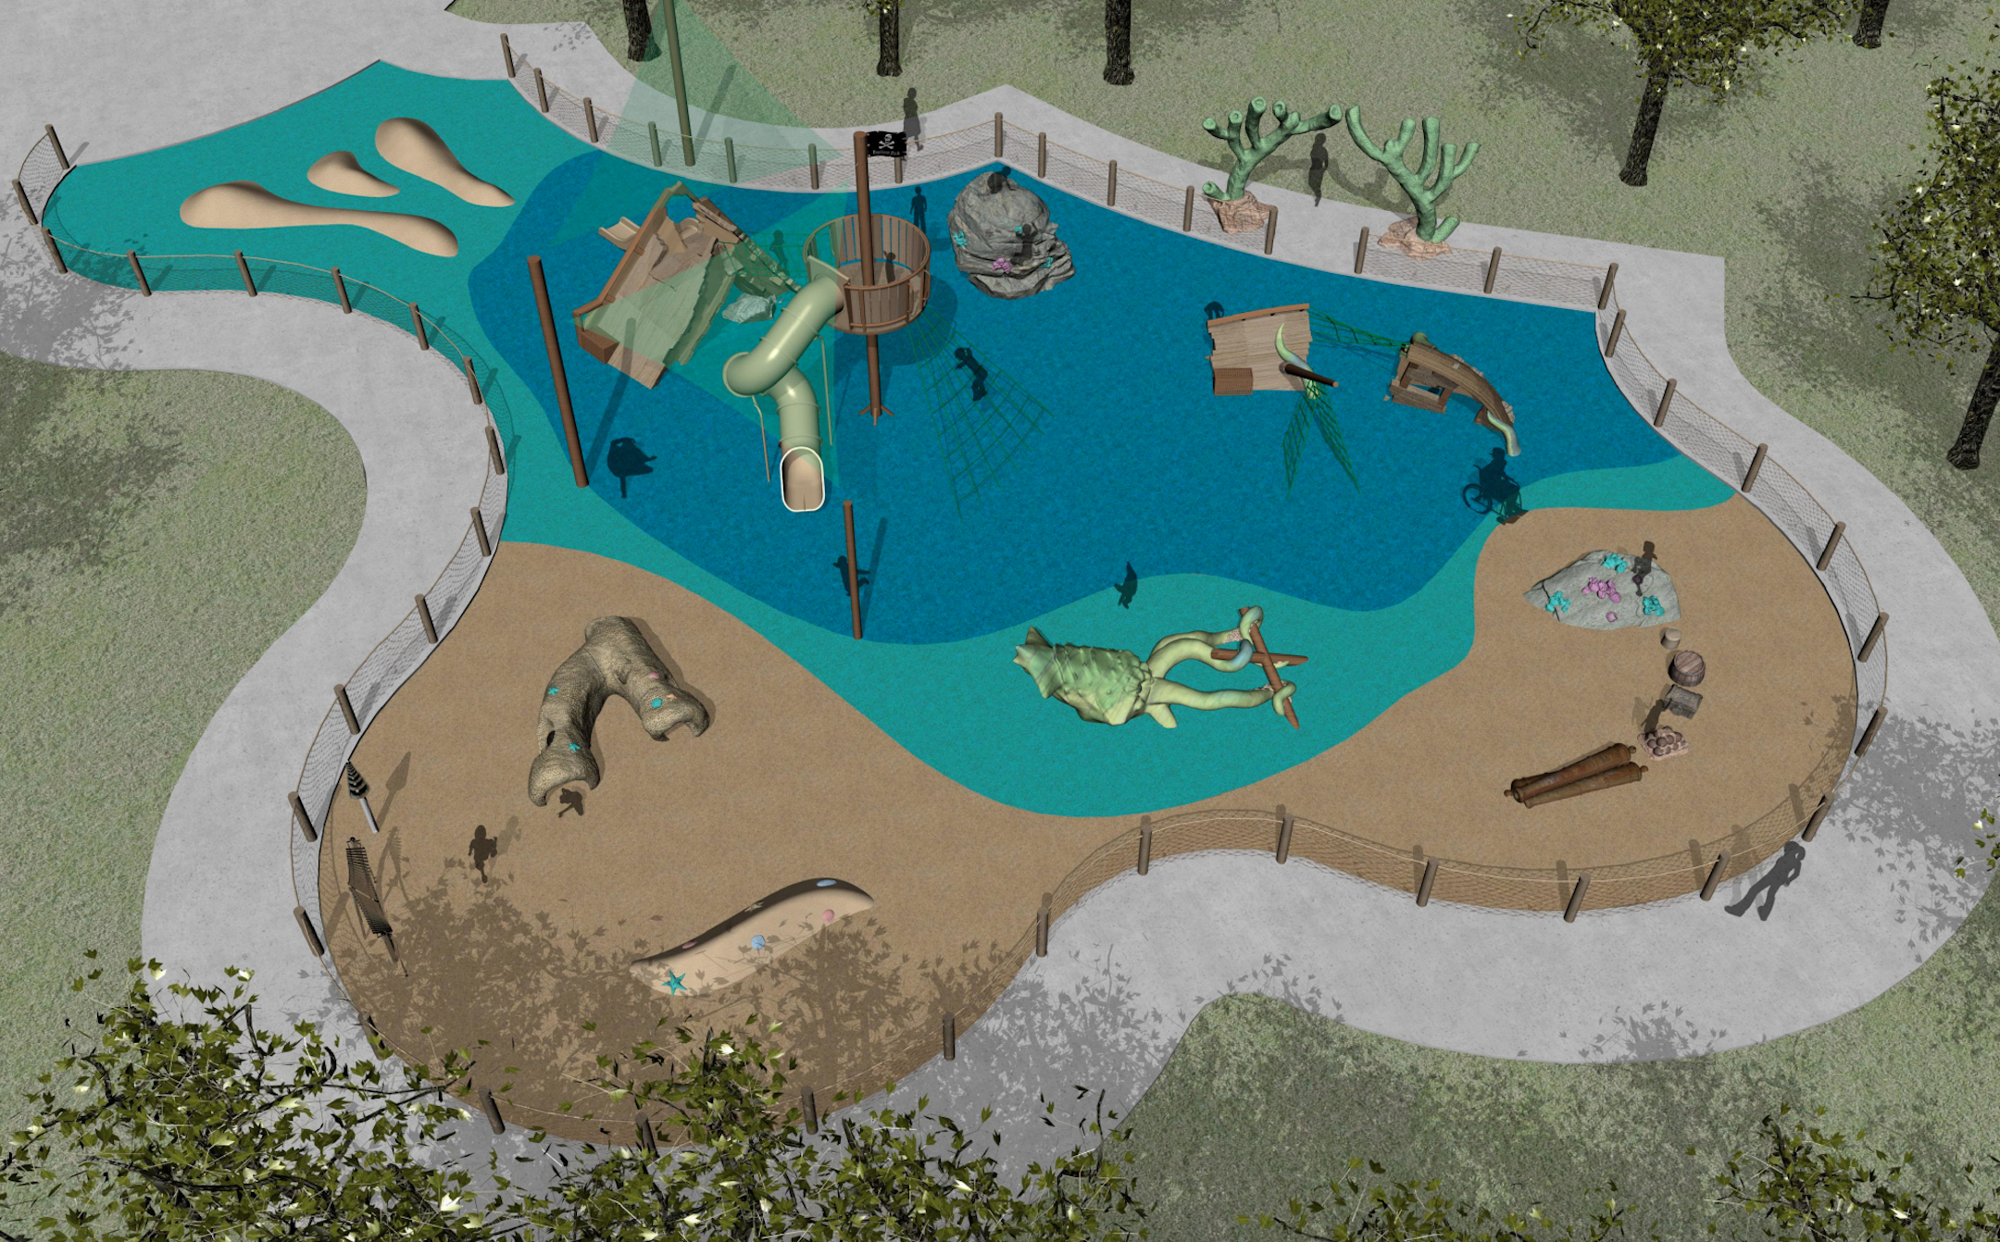 The $3.2 million Bayfront Park project includes a replacement of the playground with one featuring  shipwreck theme. (Courtesy image)